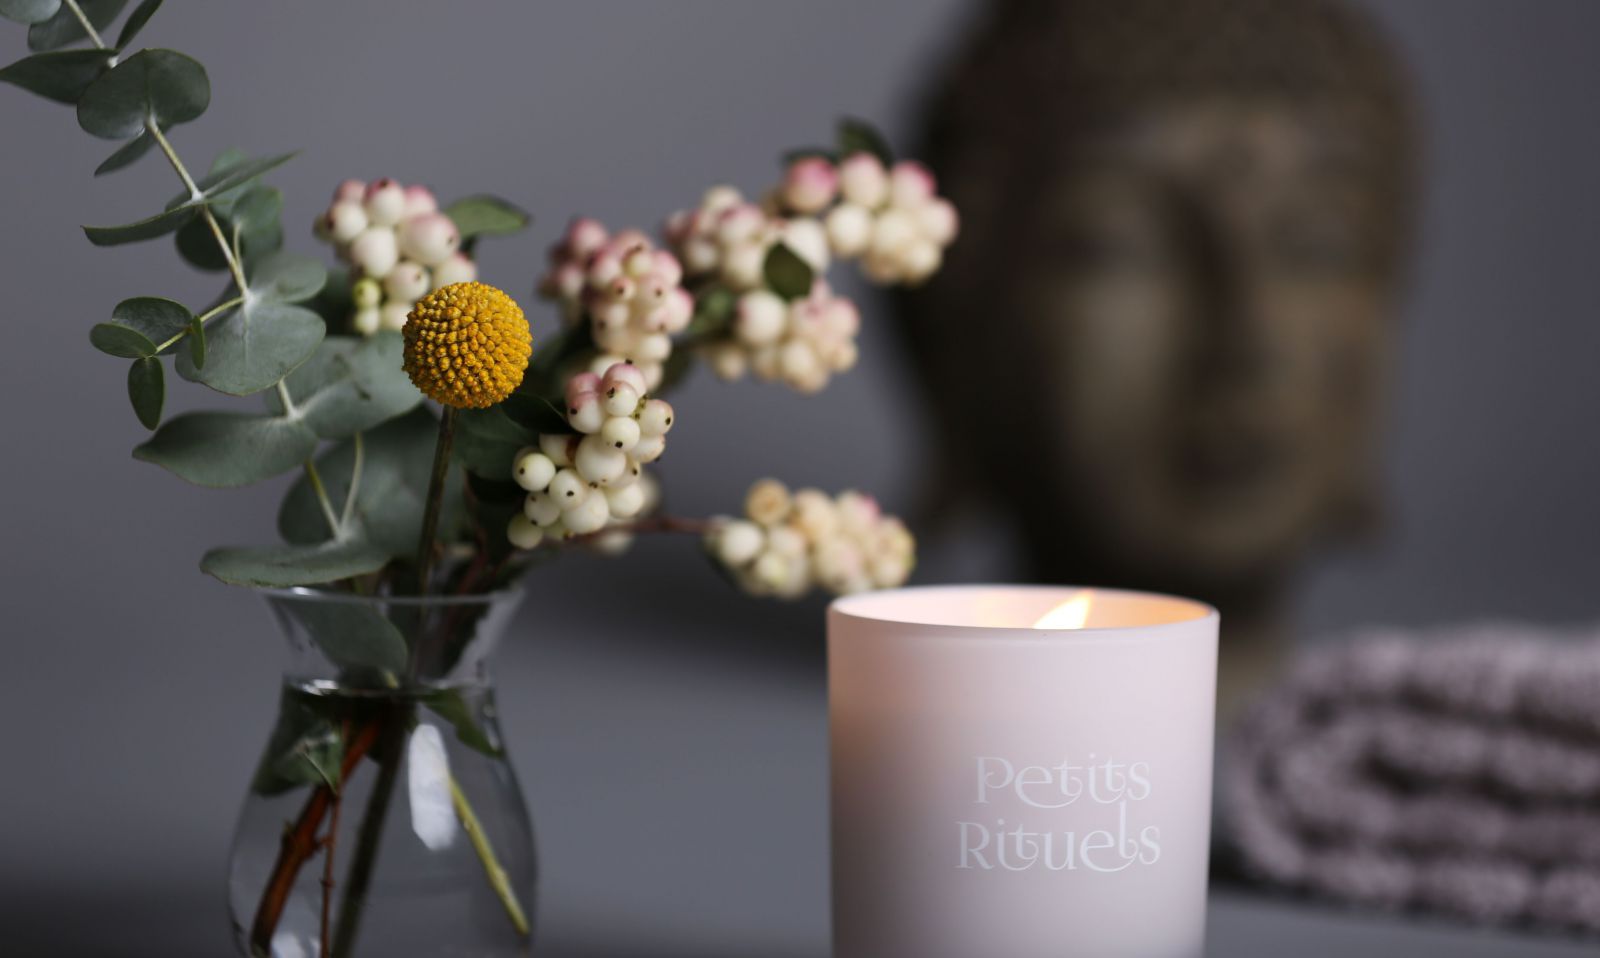 The Scientific Benefits Of Aromatherapy Candles - Petits Rituels